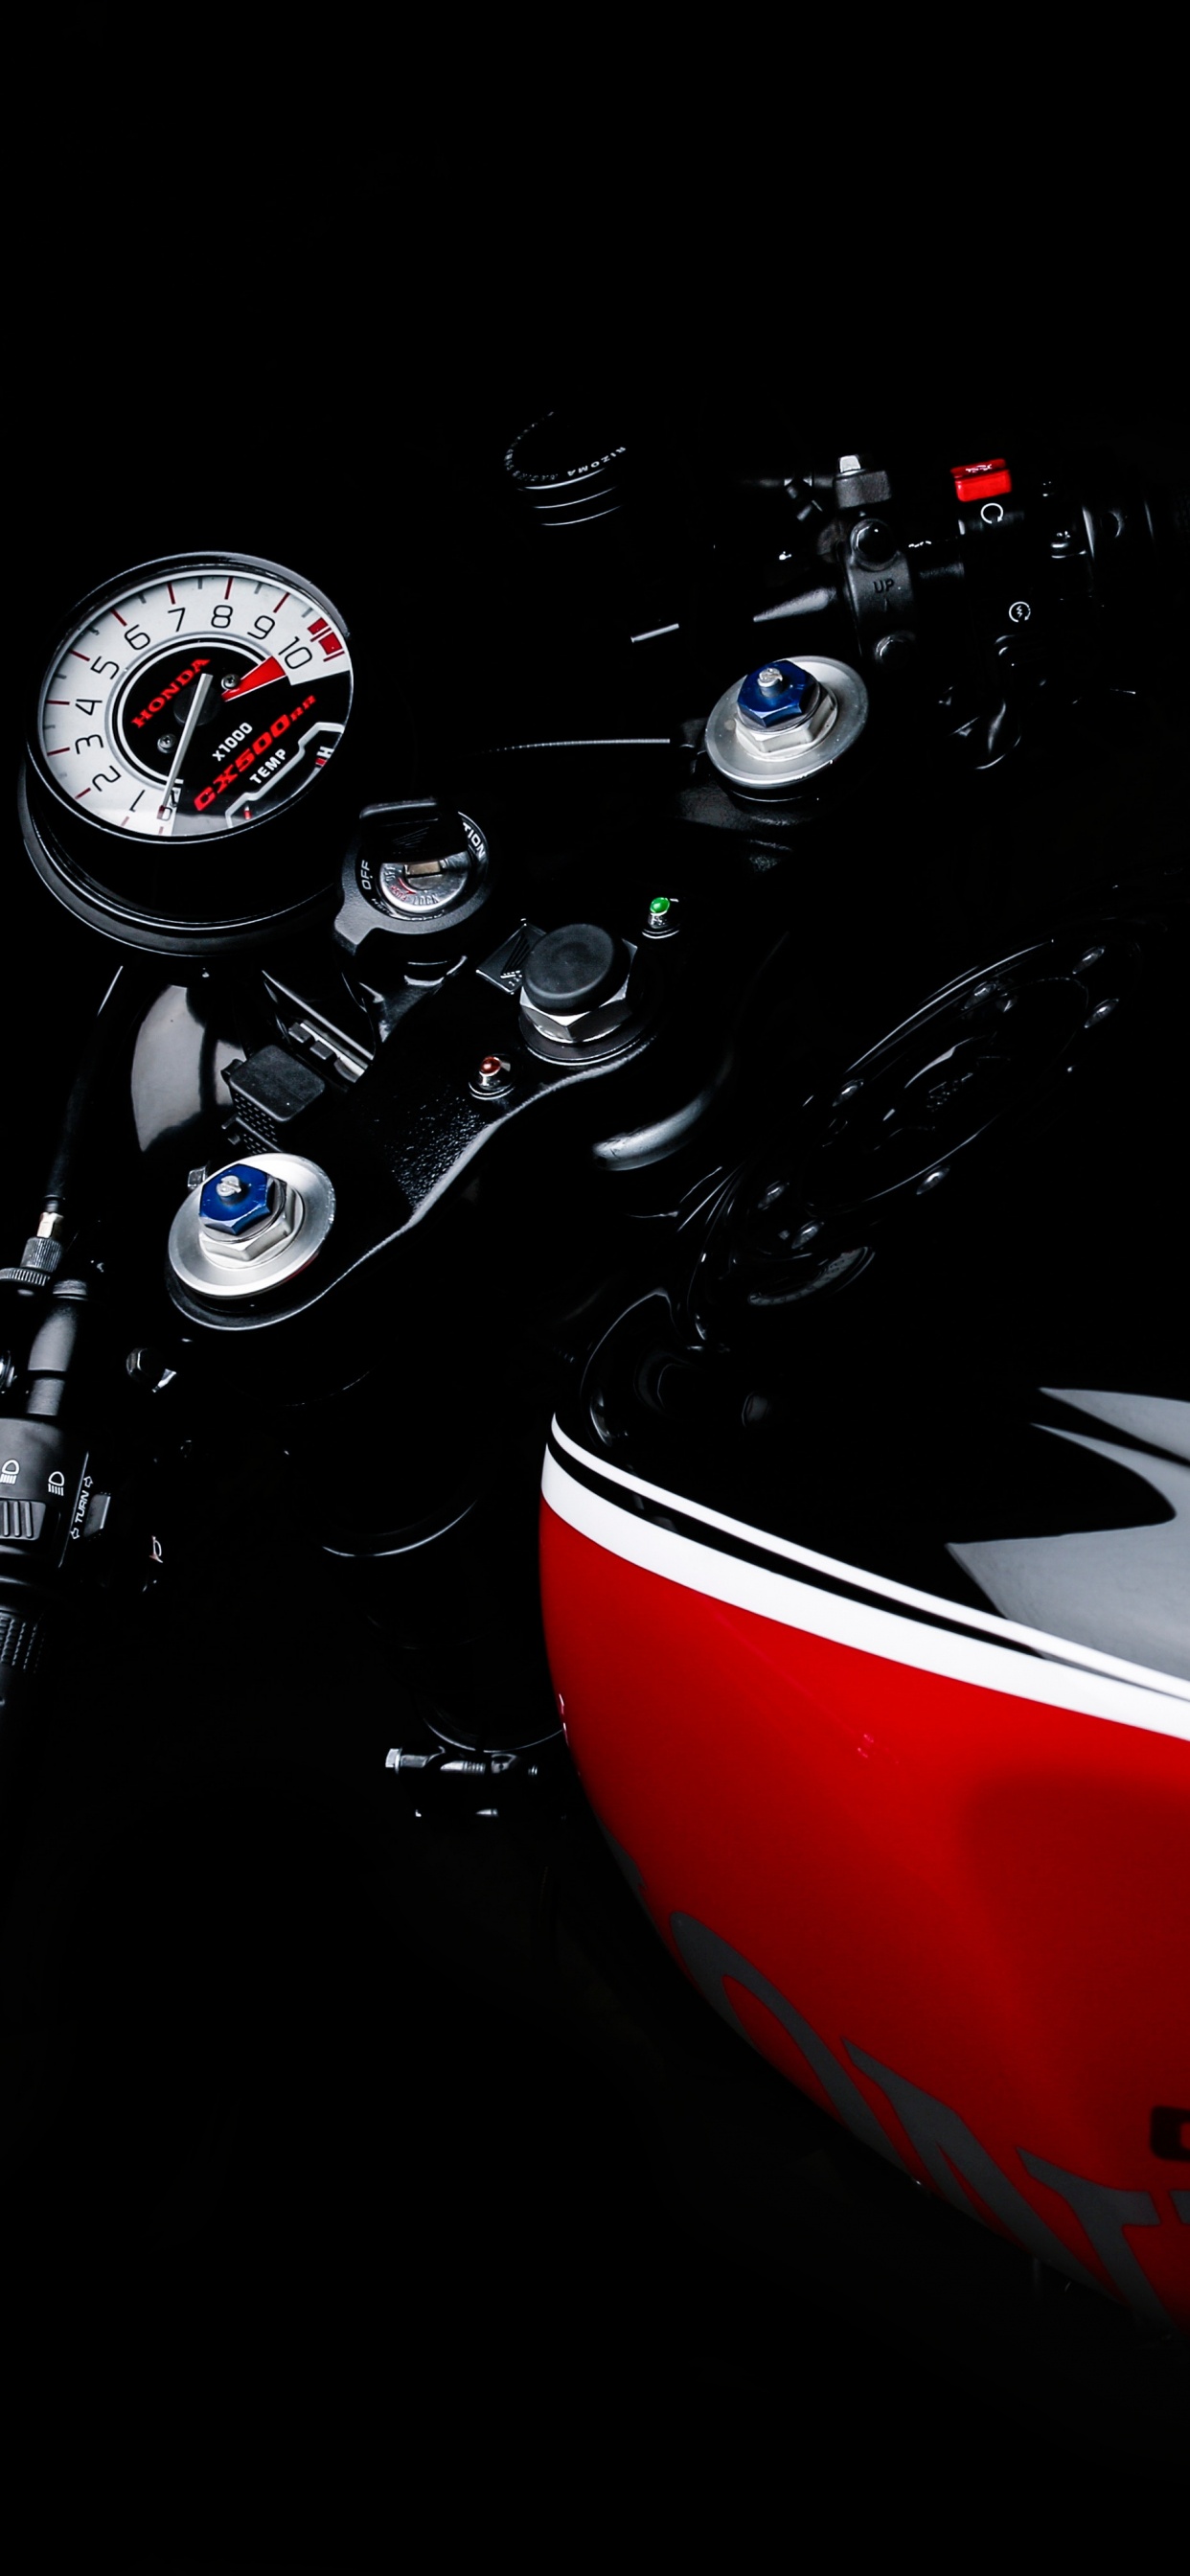 Red and Black Honda Motorcycle. Wallpaper in 1242x2688 Resolution